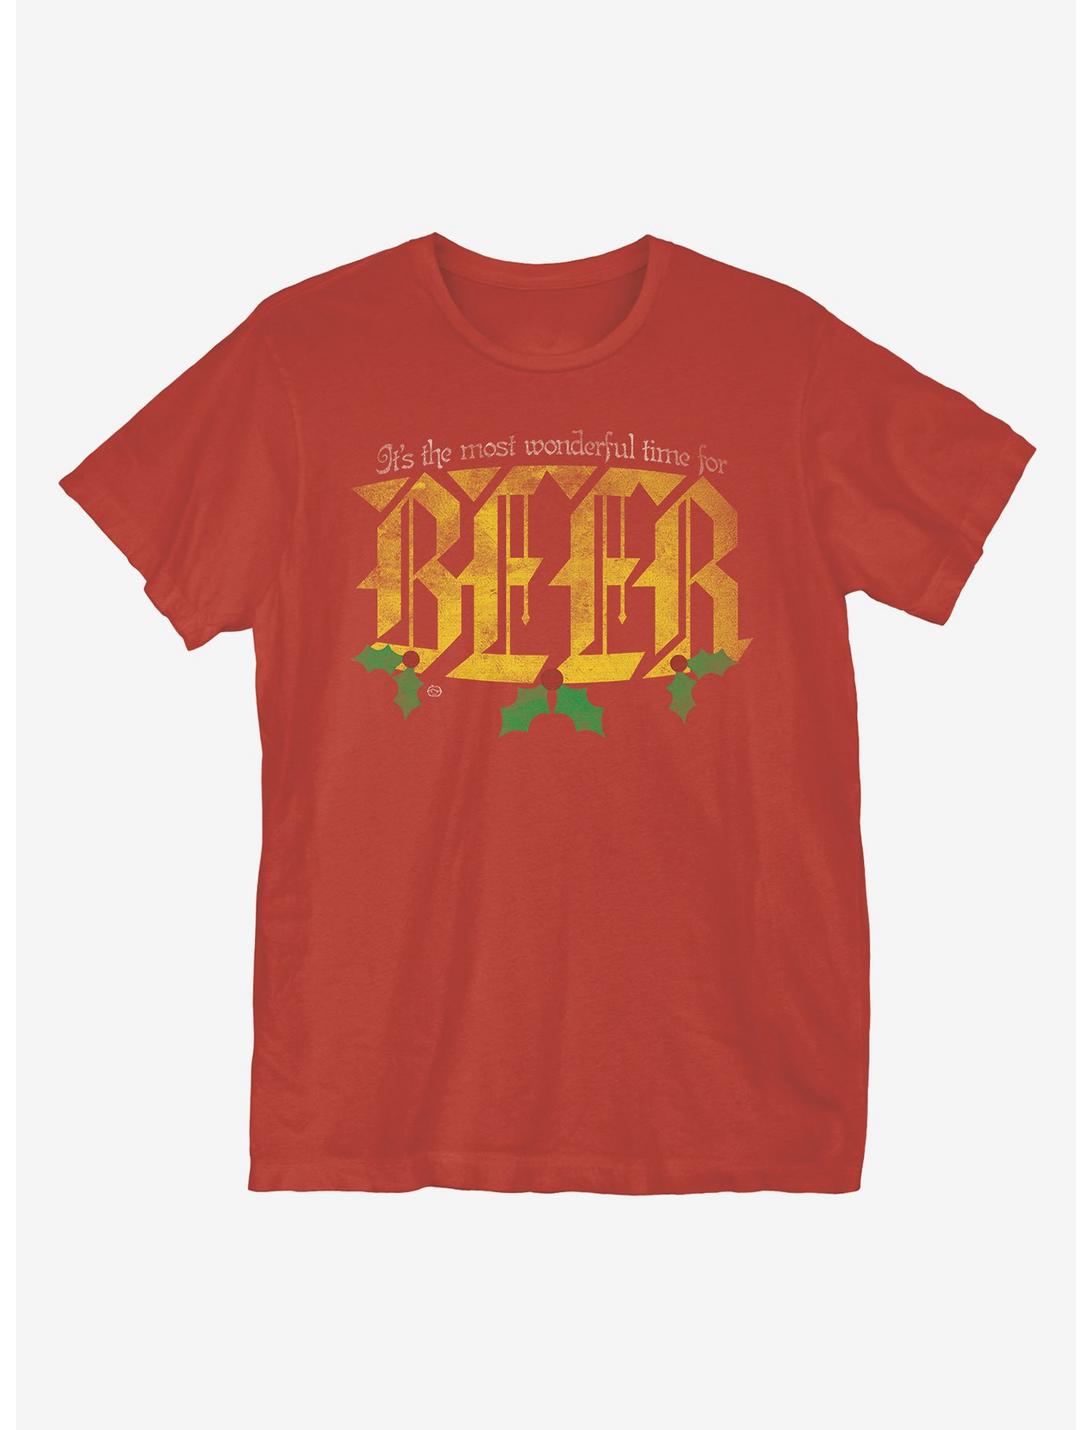 Wonderful Time For Beer T-Shirt, RED, hi-res